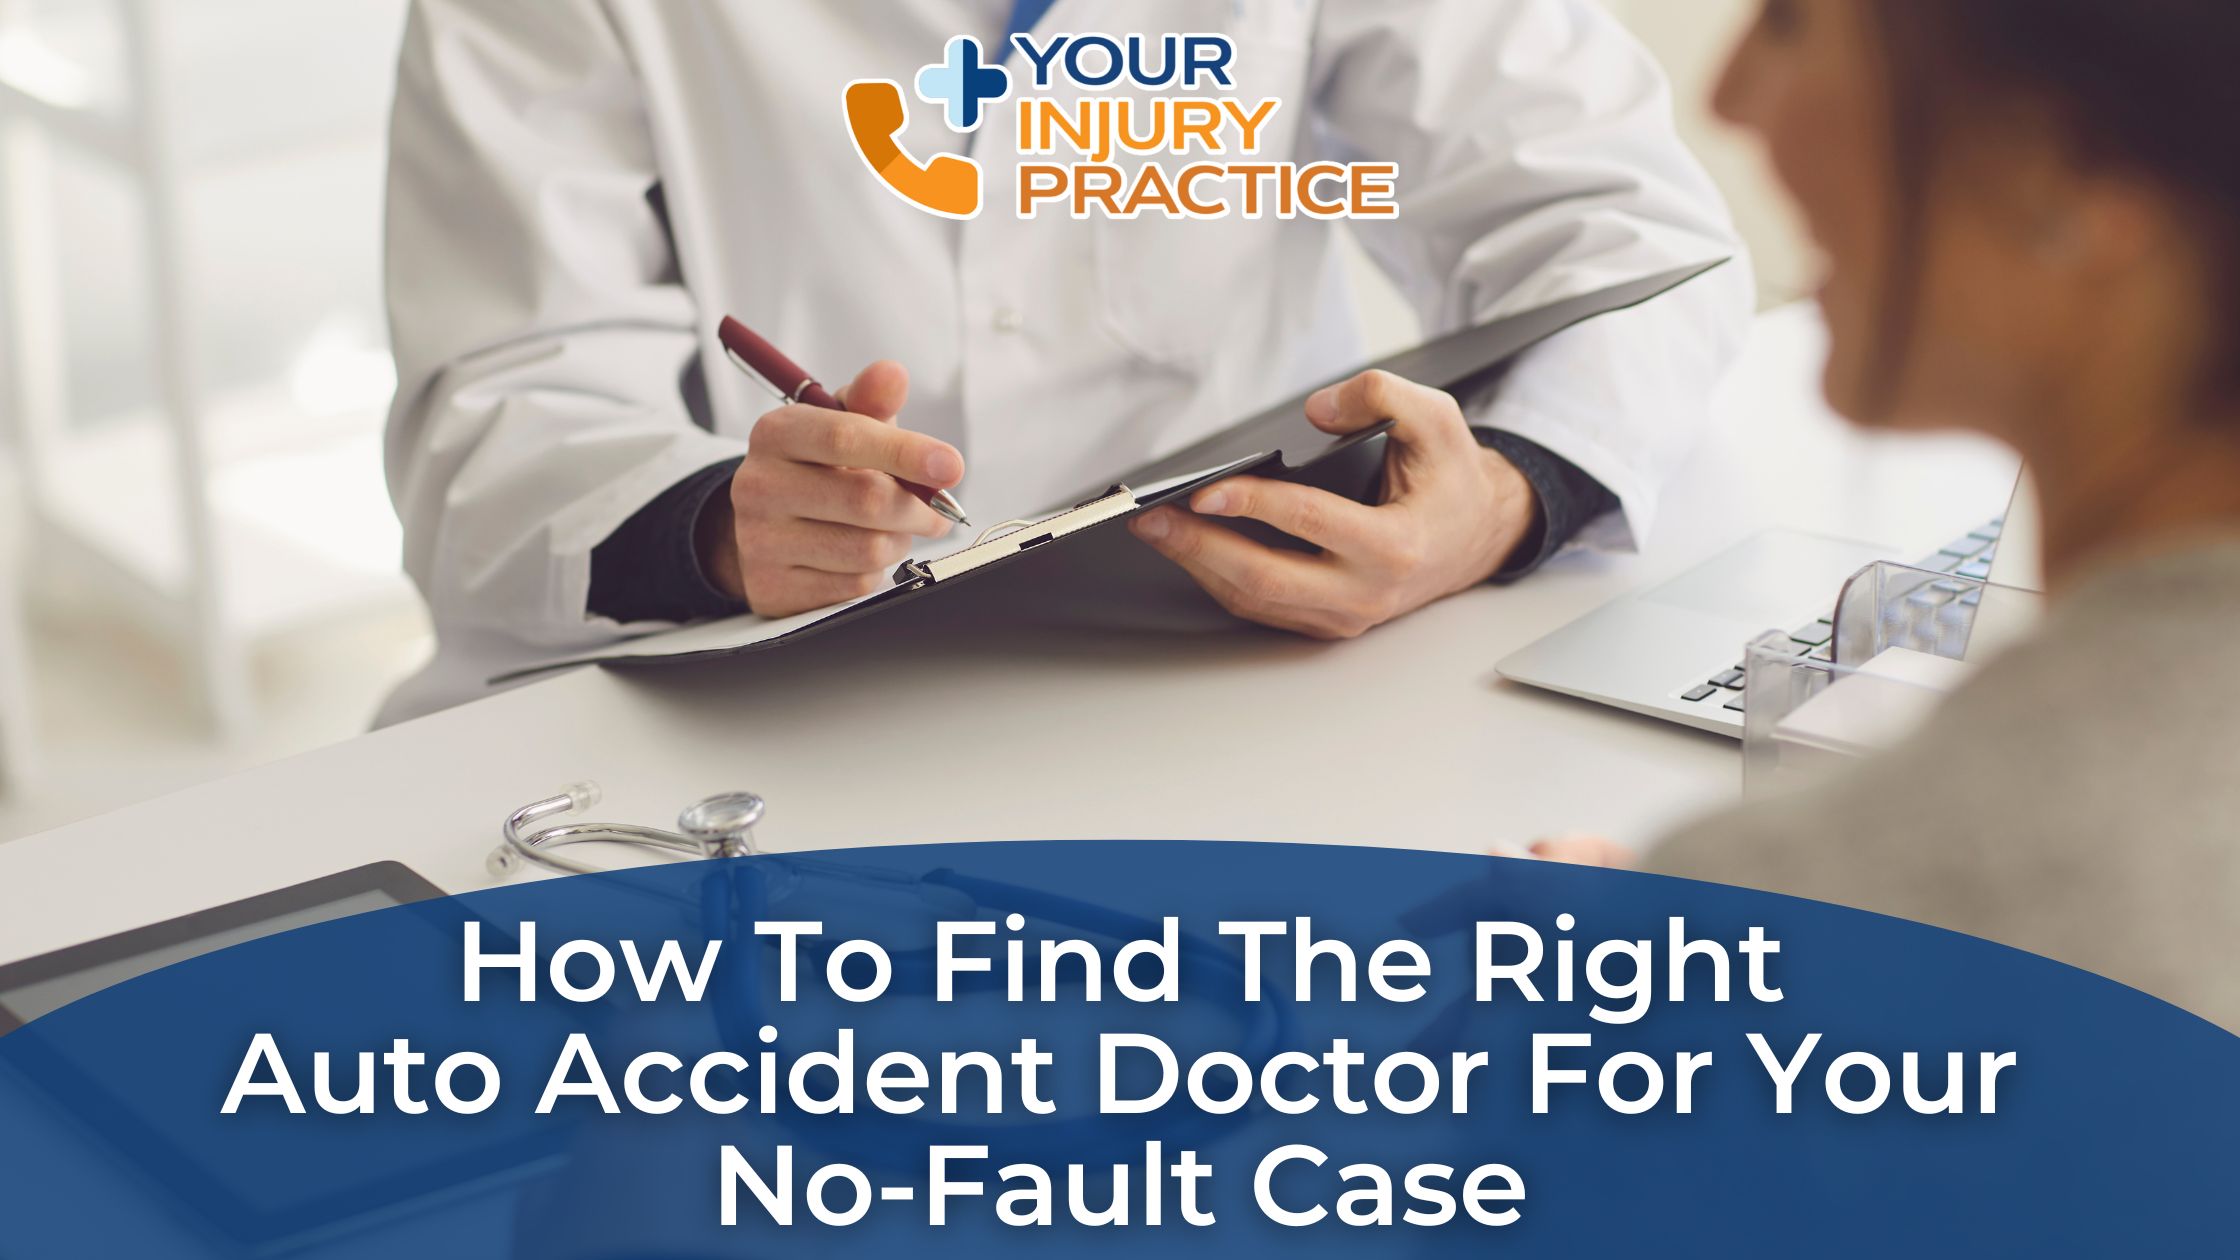 Find the perfect no-fault auto accident doctor for your needs with this comprehensive guide. Get the care you need to heal after a car accident.